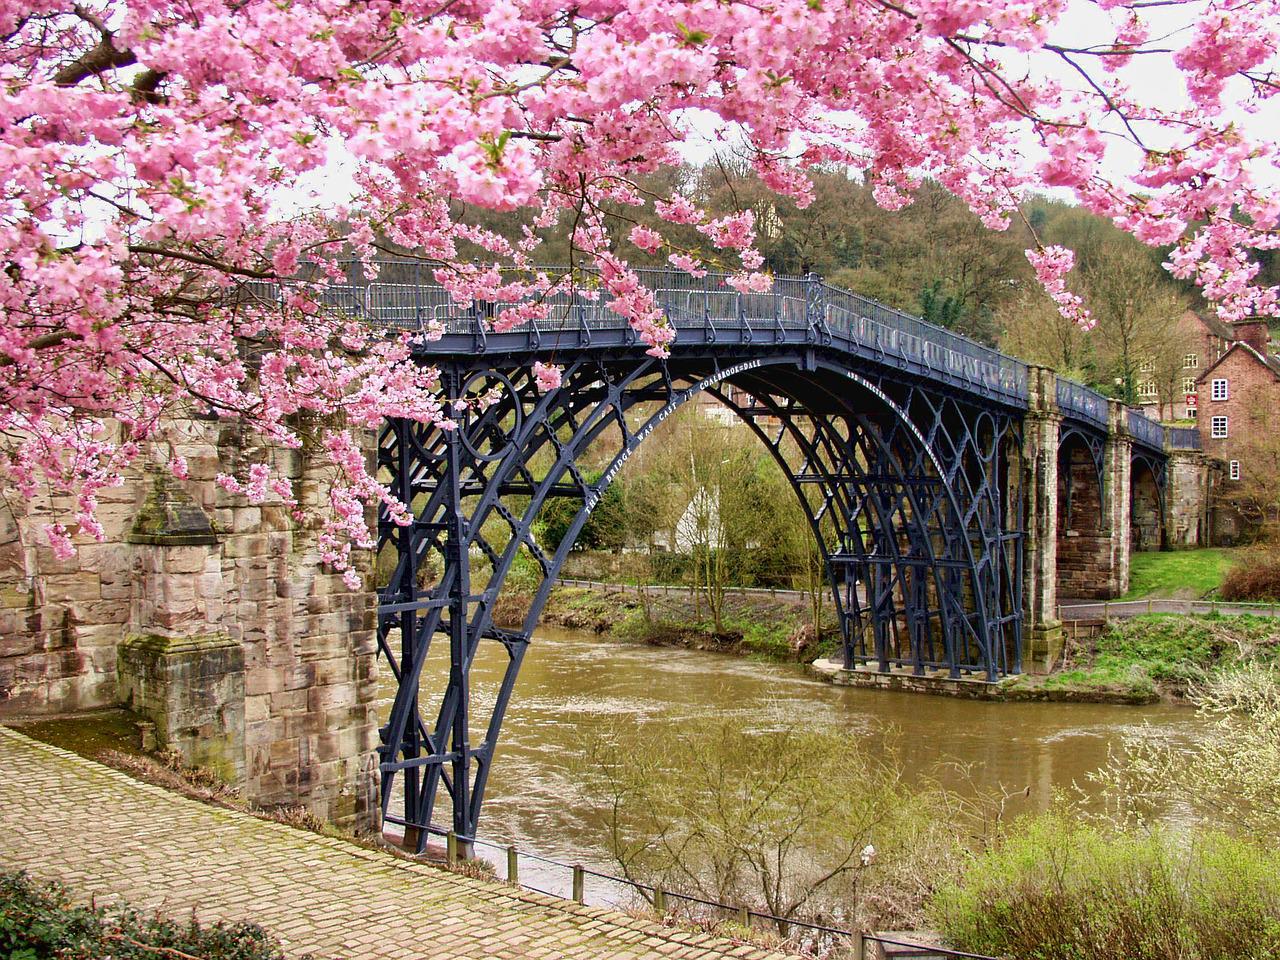 Walking alongside the river at ironbridge on is one of the best free things to do in particularly when blossom is in bloom as in this image with pink blossom in the foreground by the bridge